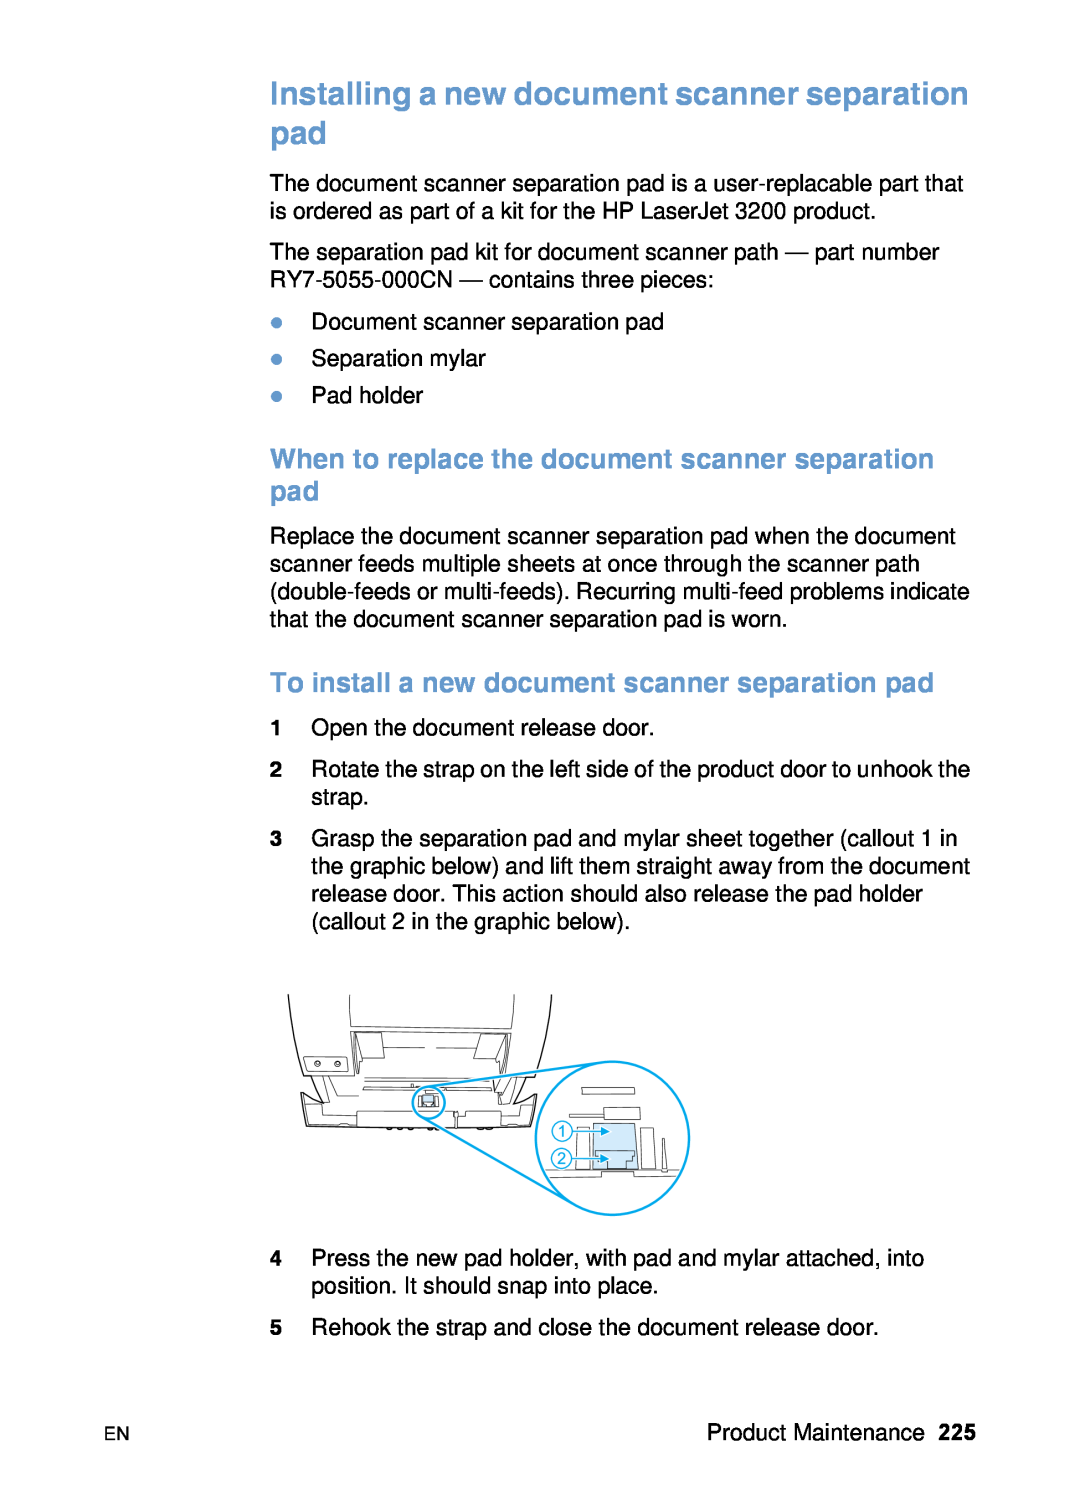 HP 3200 manual Installing a new document scanner separation pad, When to replace the document scanner separation pad 